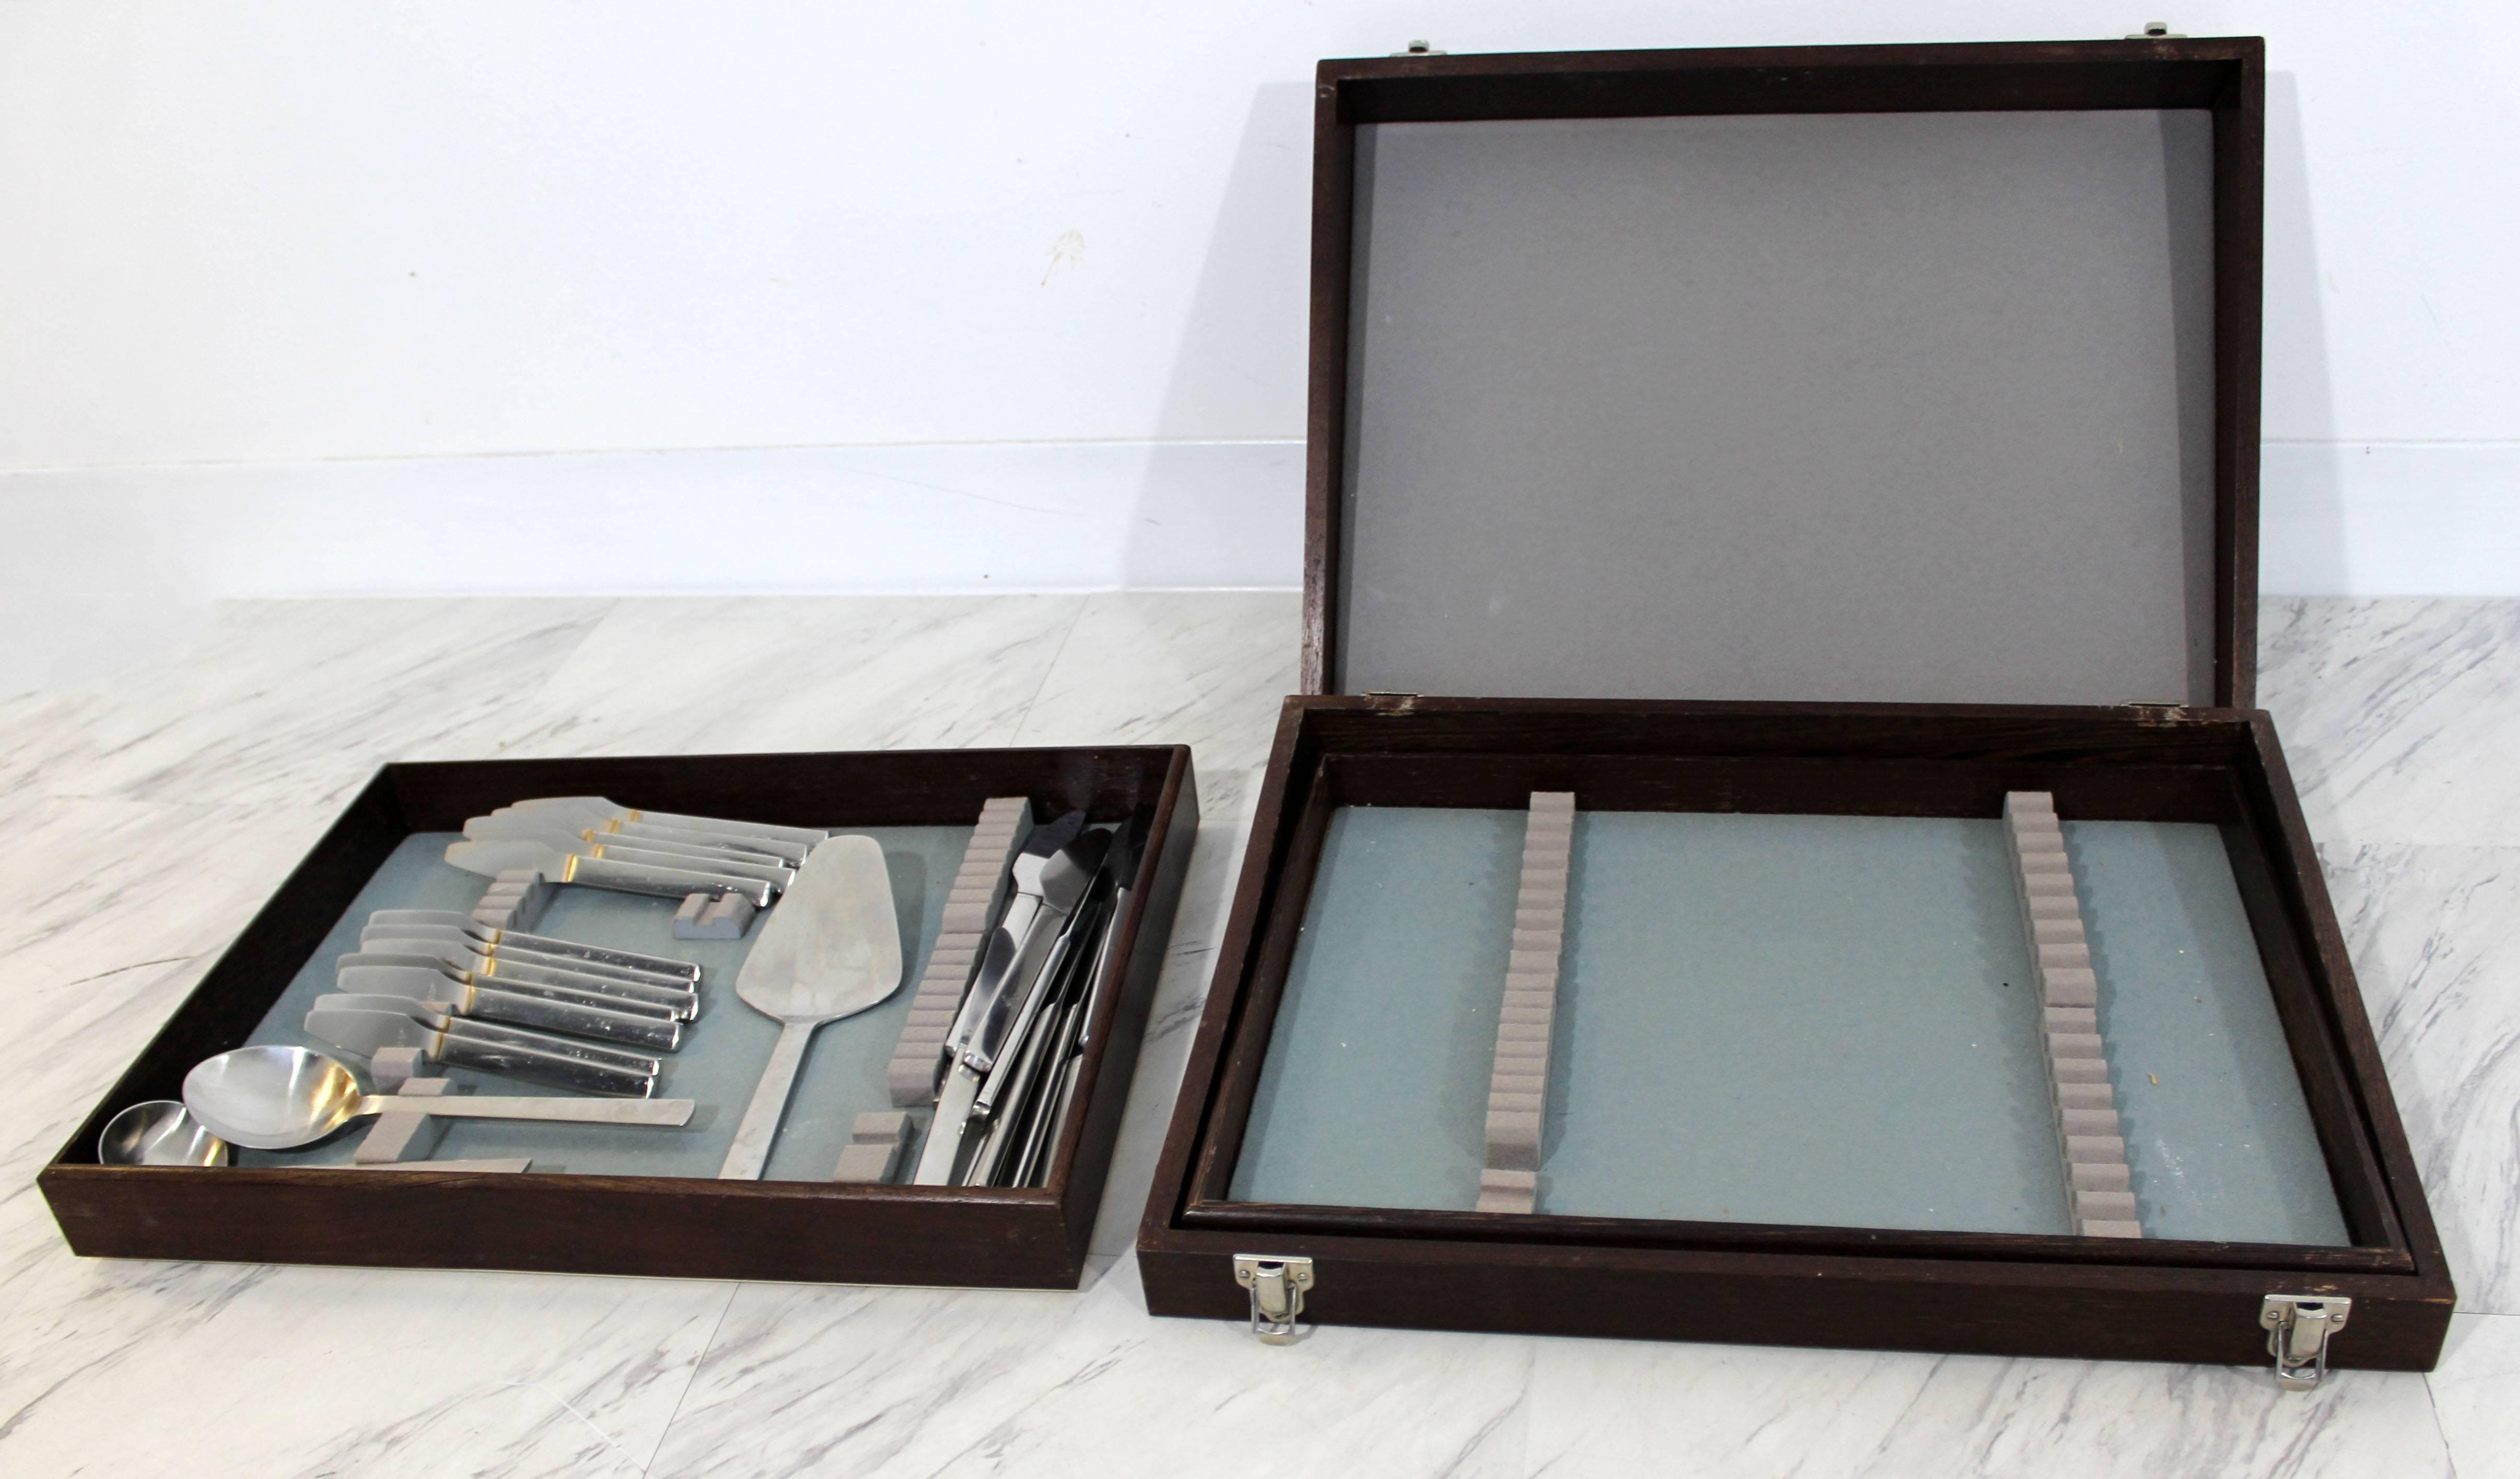 For your consideration is a stainless steel, flateware set by George Jensen, made in Denmark. In excellent condition. The dimensions of the box are 17.75